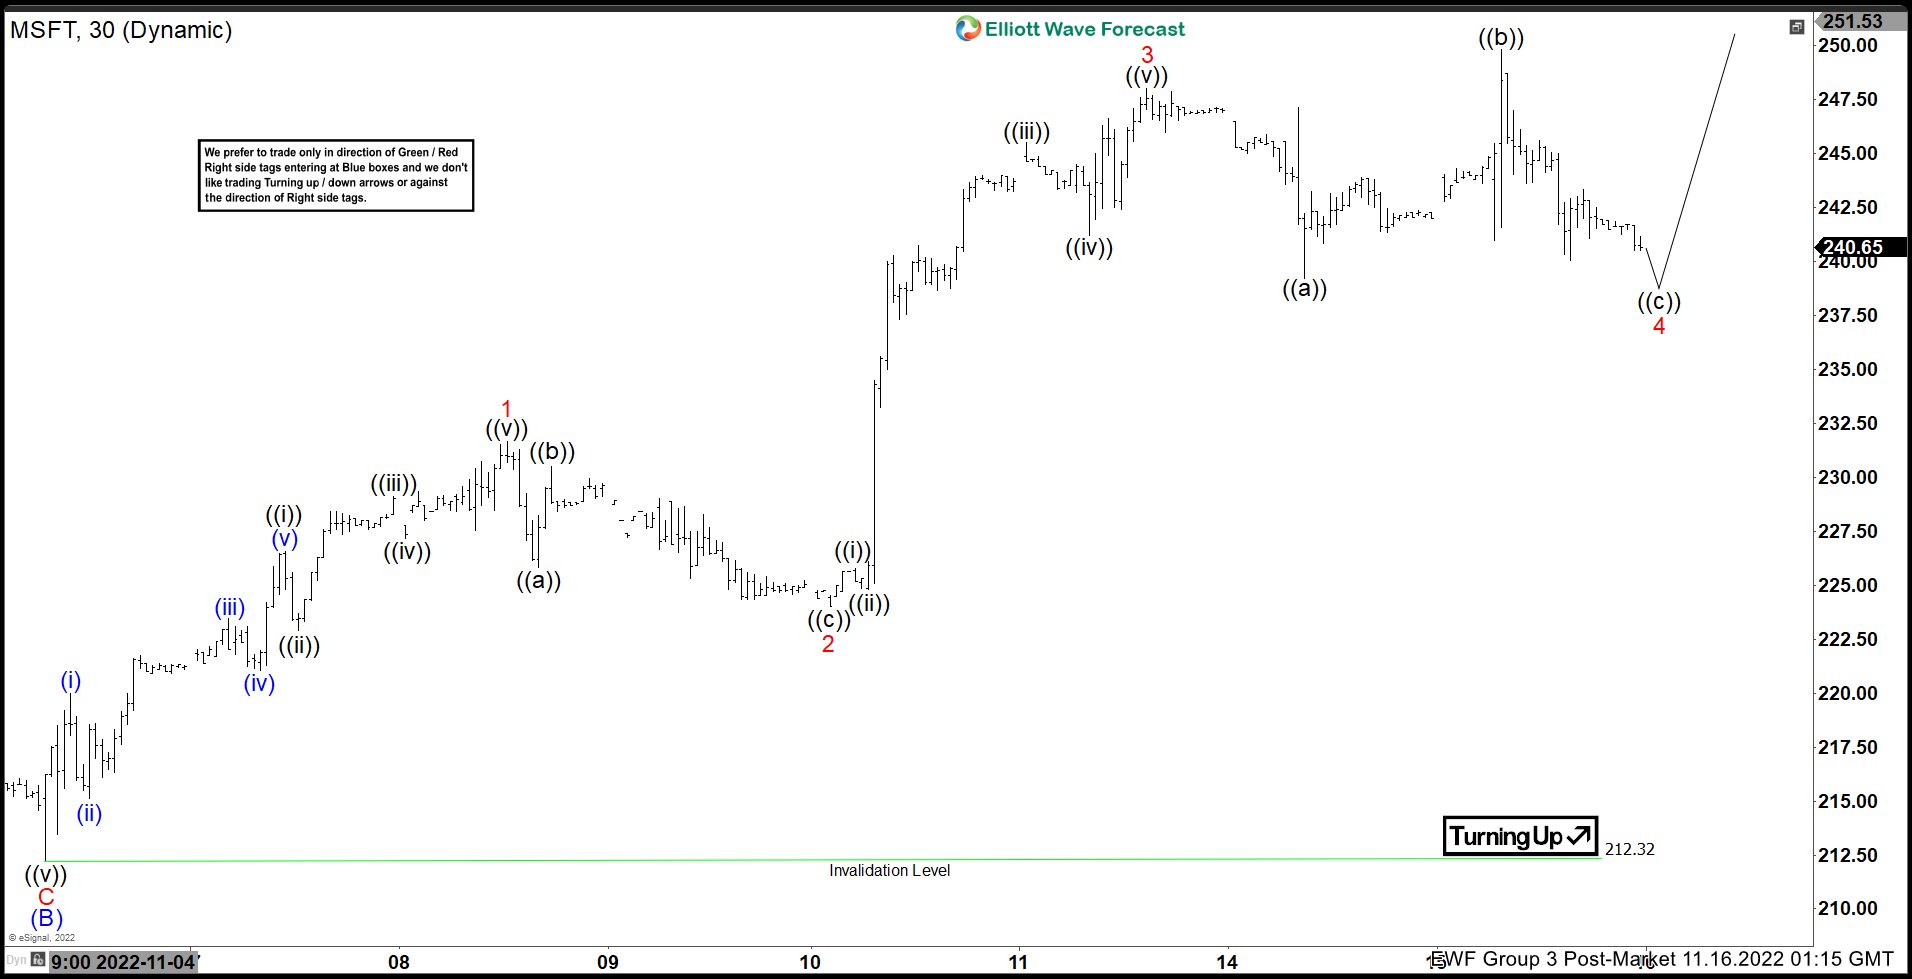 Elliott Wave View: MSFT Should Drop After A Flat Correction Is Completed